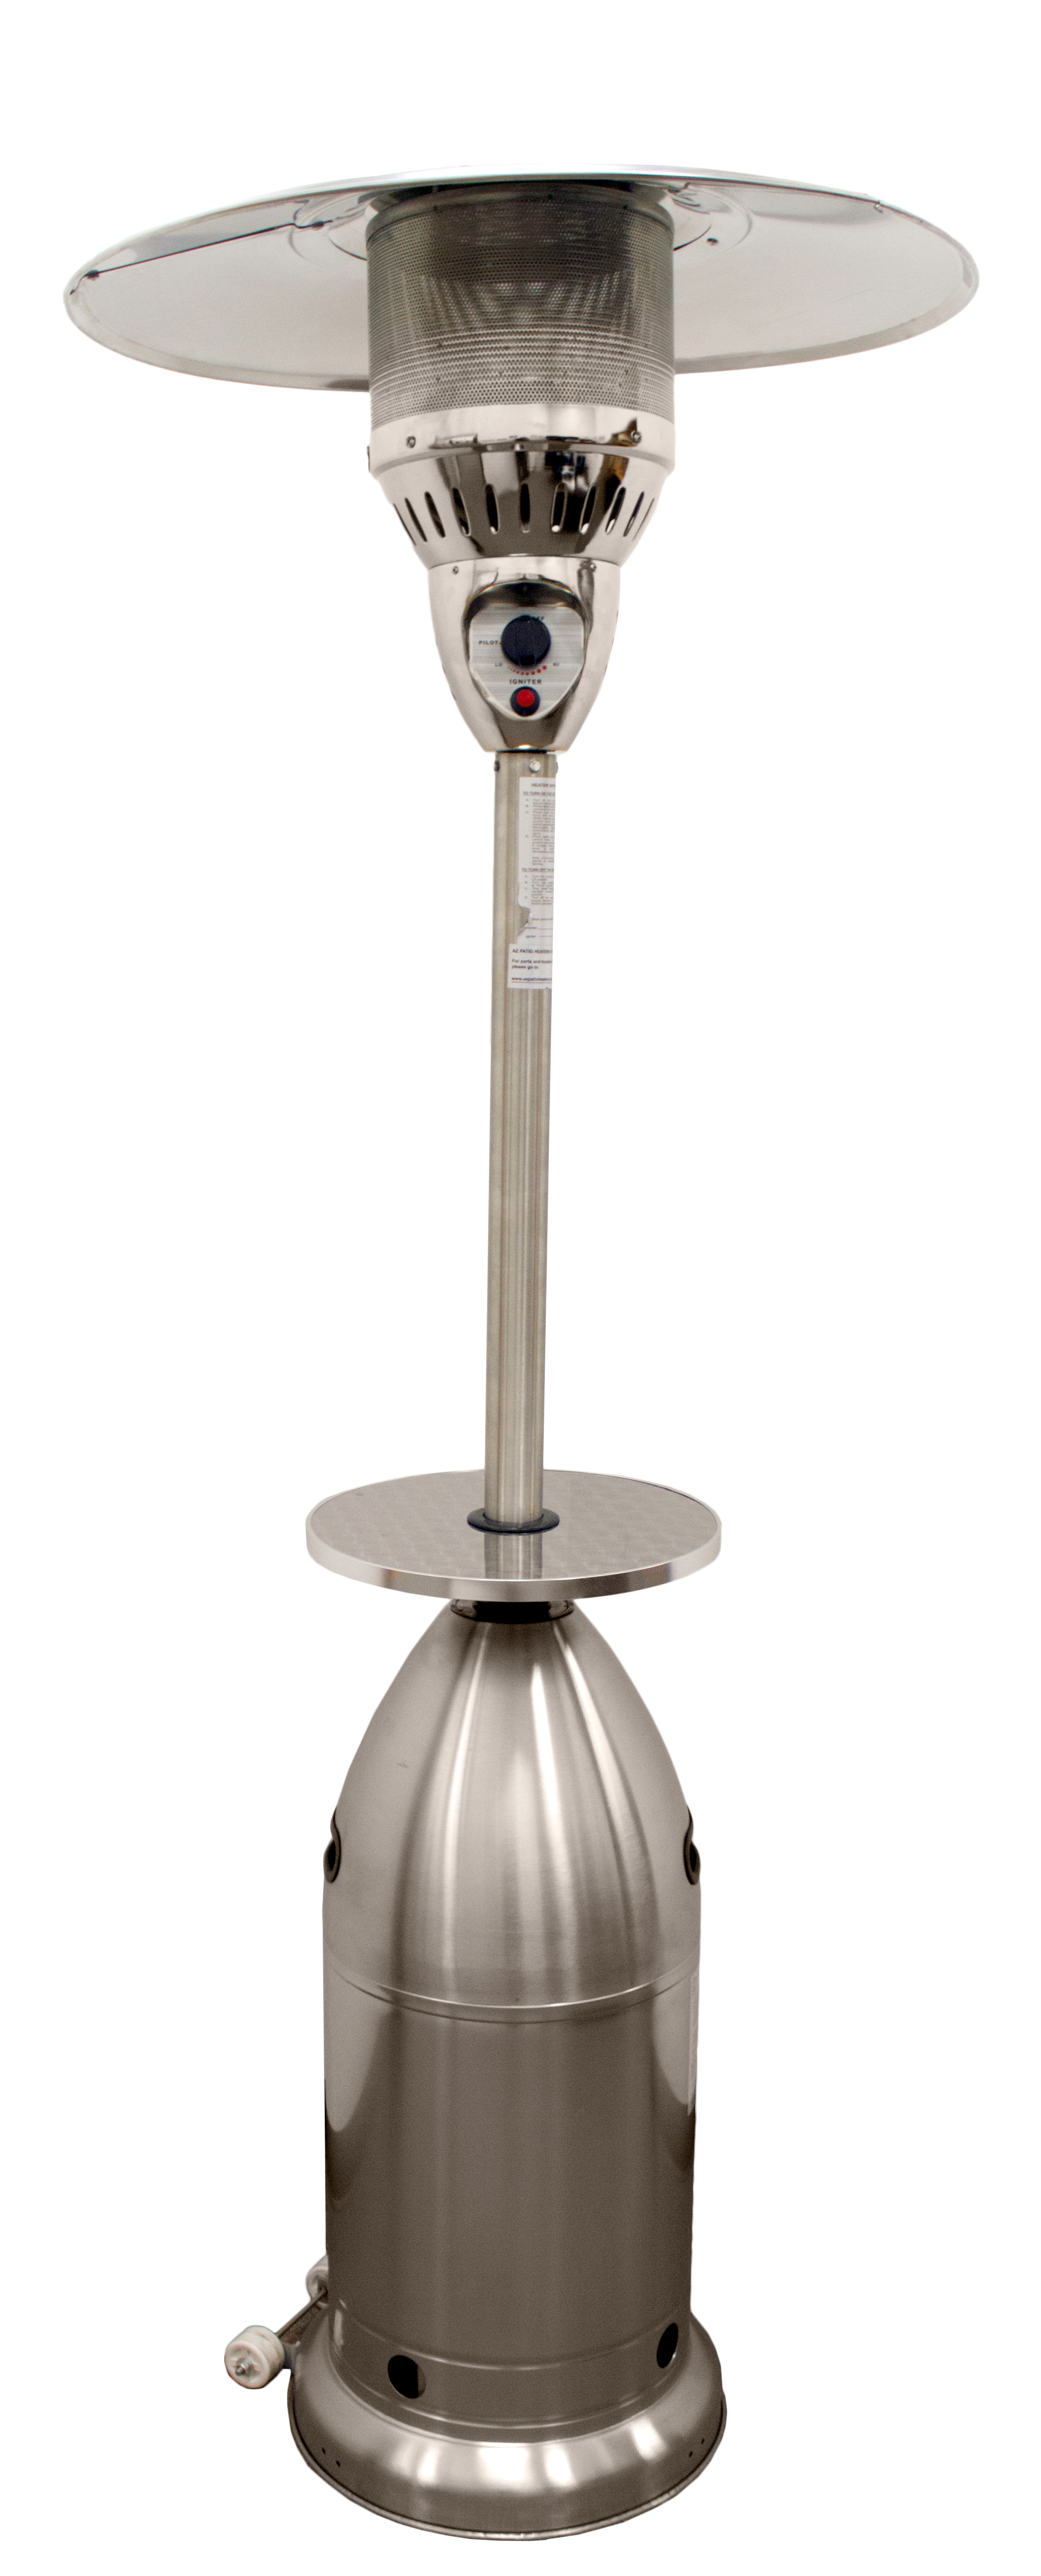 88 Tall Tapered Stainless Steel Patio Heater with Table